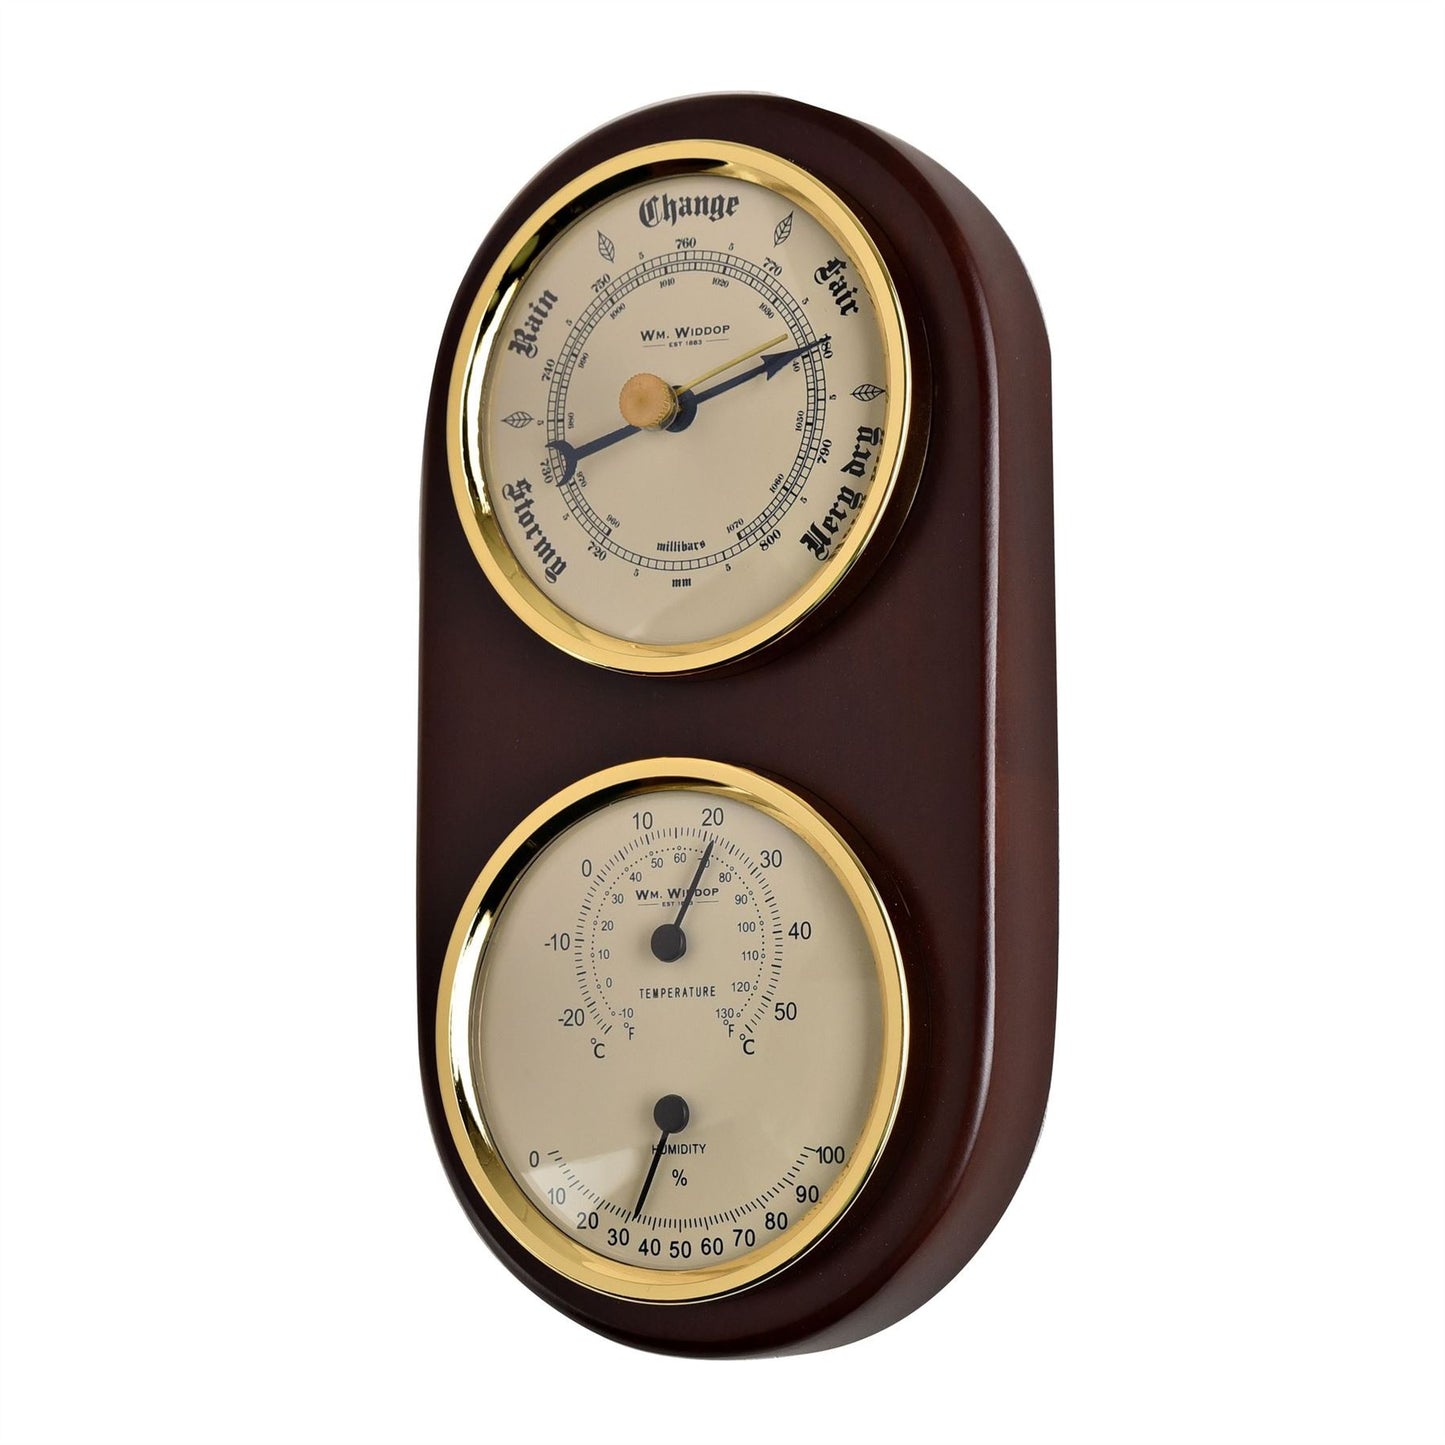 Wm.Widdop Wooden Barometer, Thermometer and Hygrometer